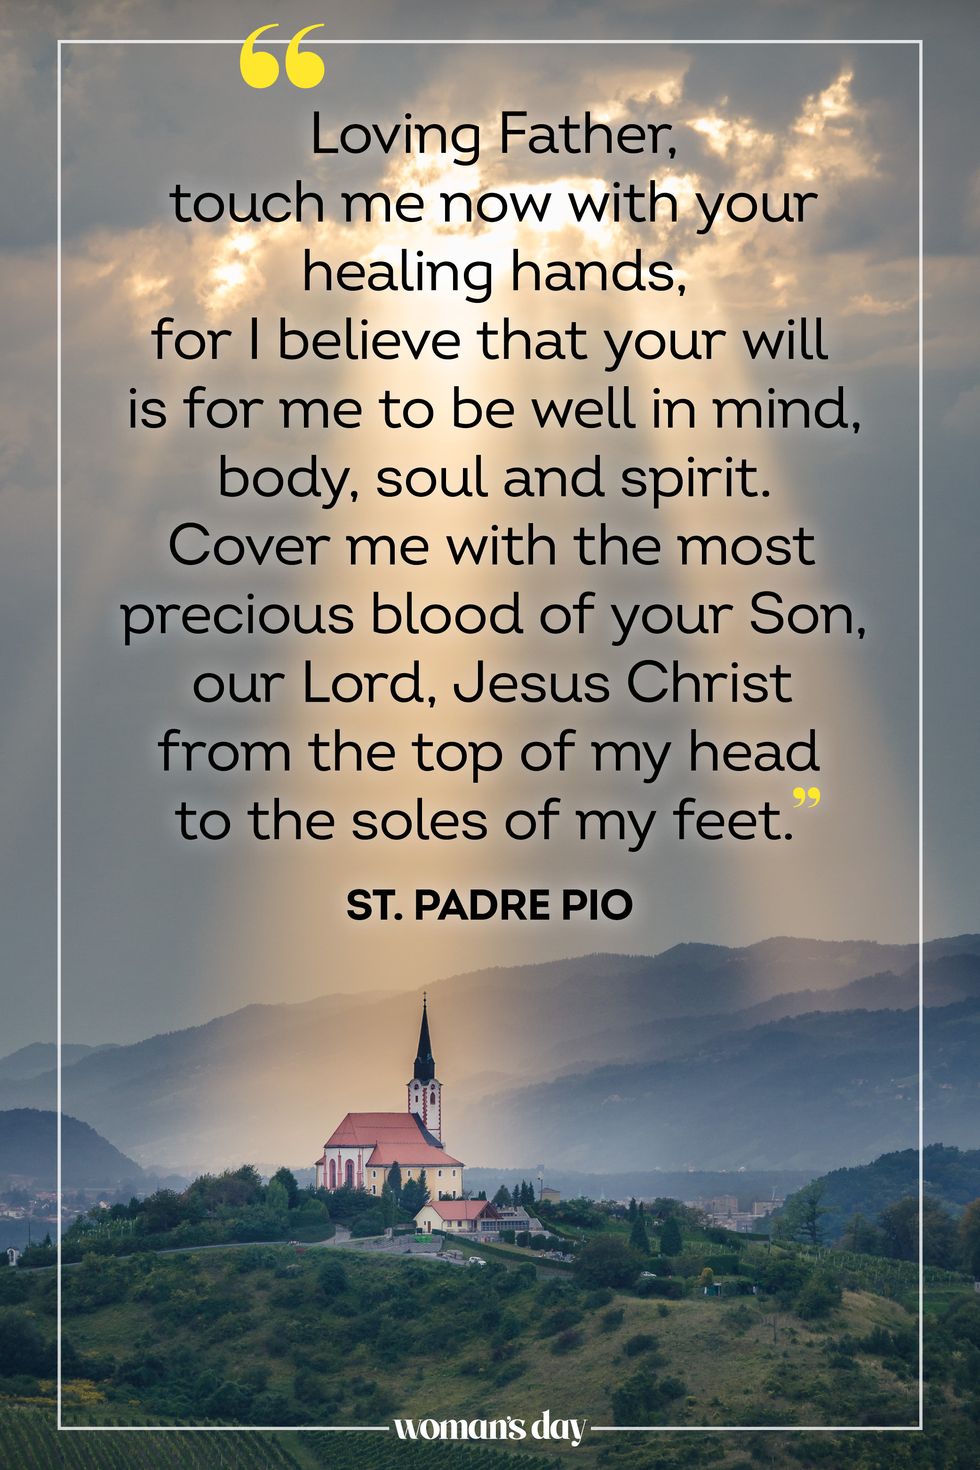 40+ Prayers for Healing - Powerful Words for Strength